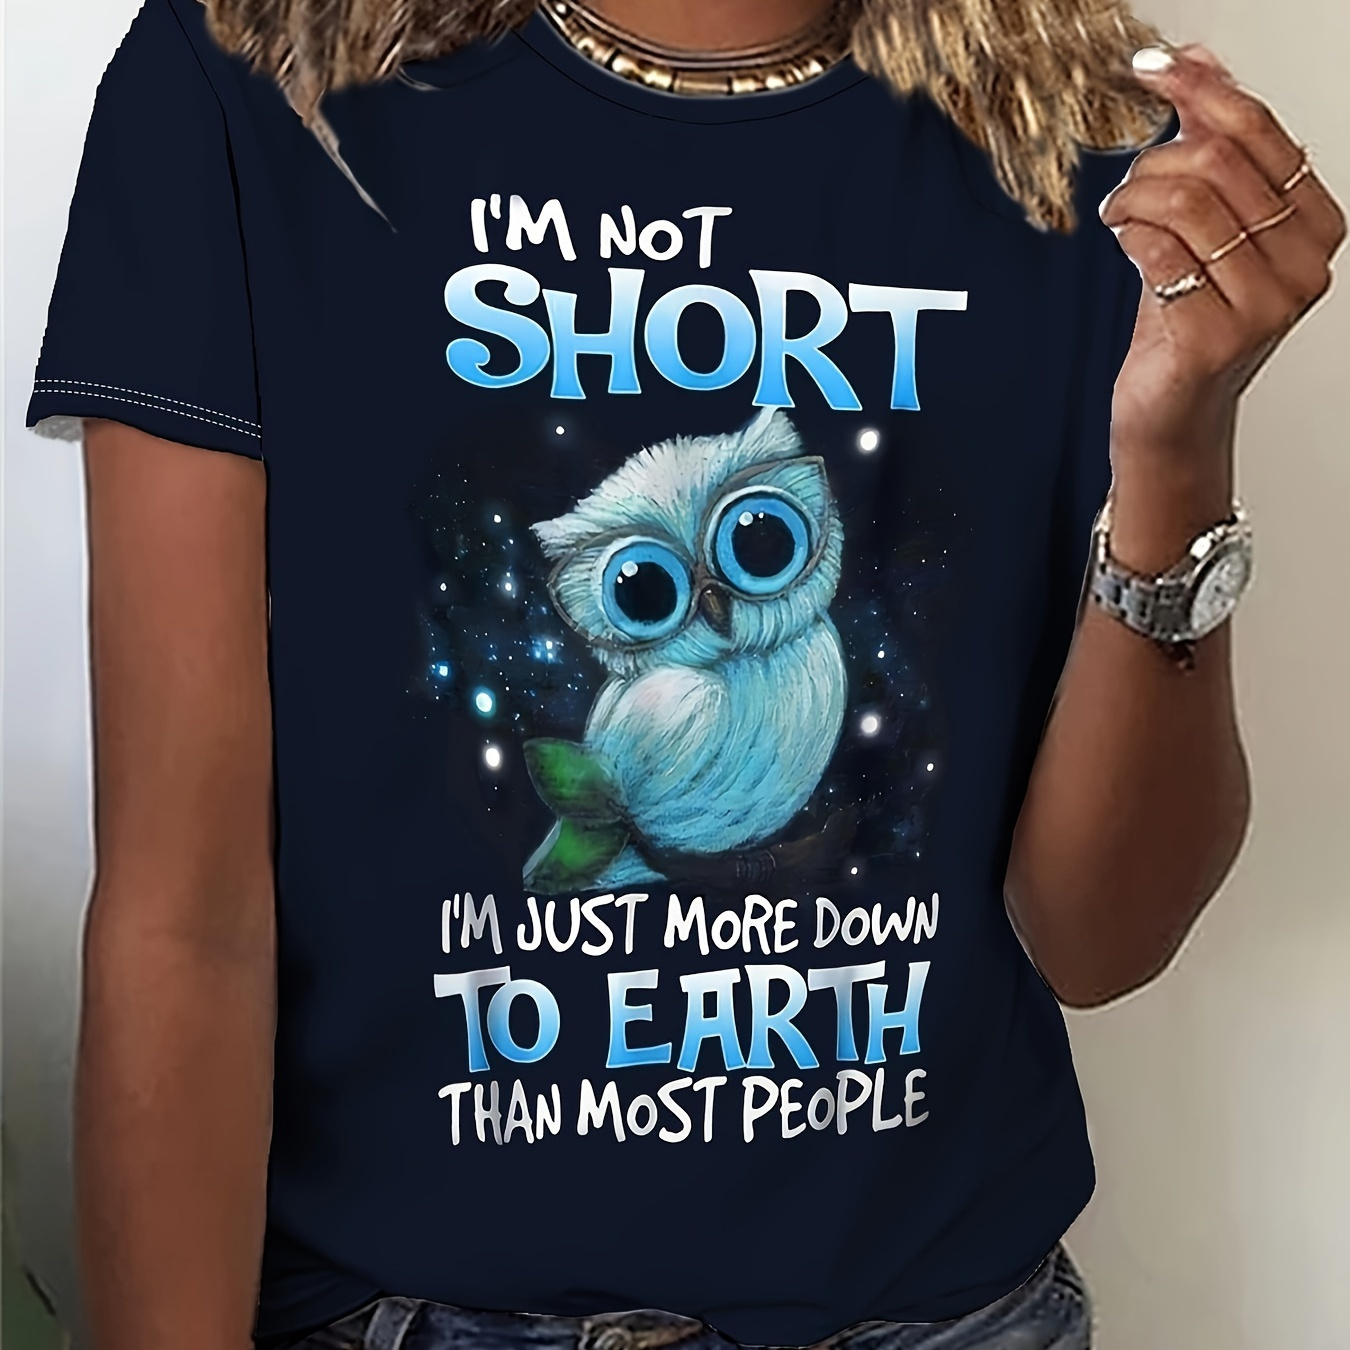 

Owl Print T-shirt, Casual Short Sleeve Crew Neck Top For Spring & Summer, Women's Clothing